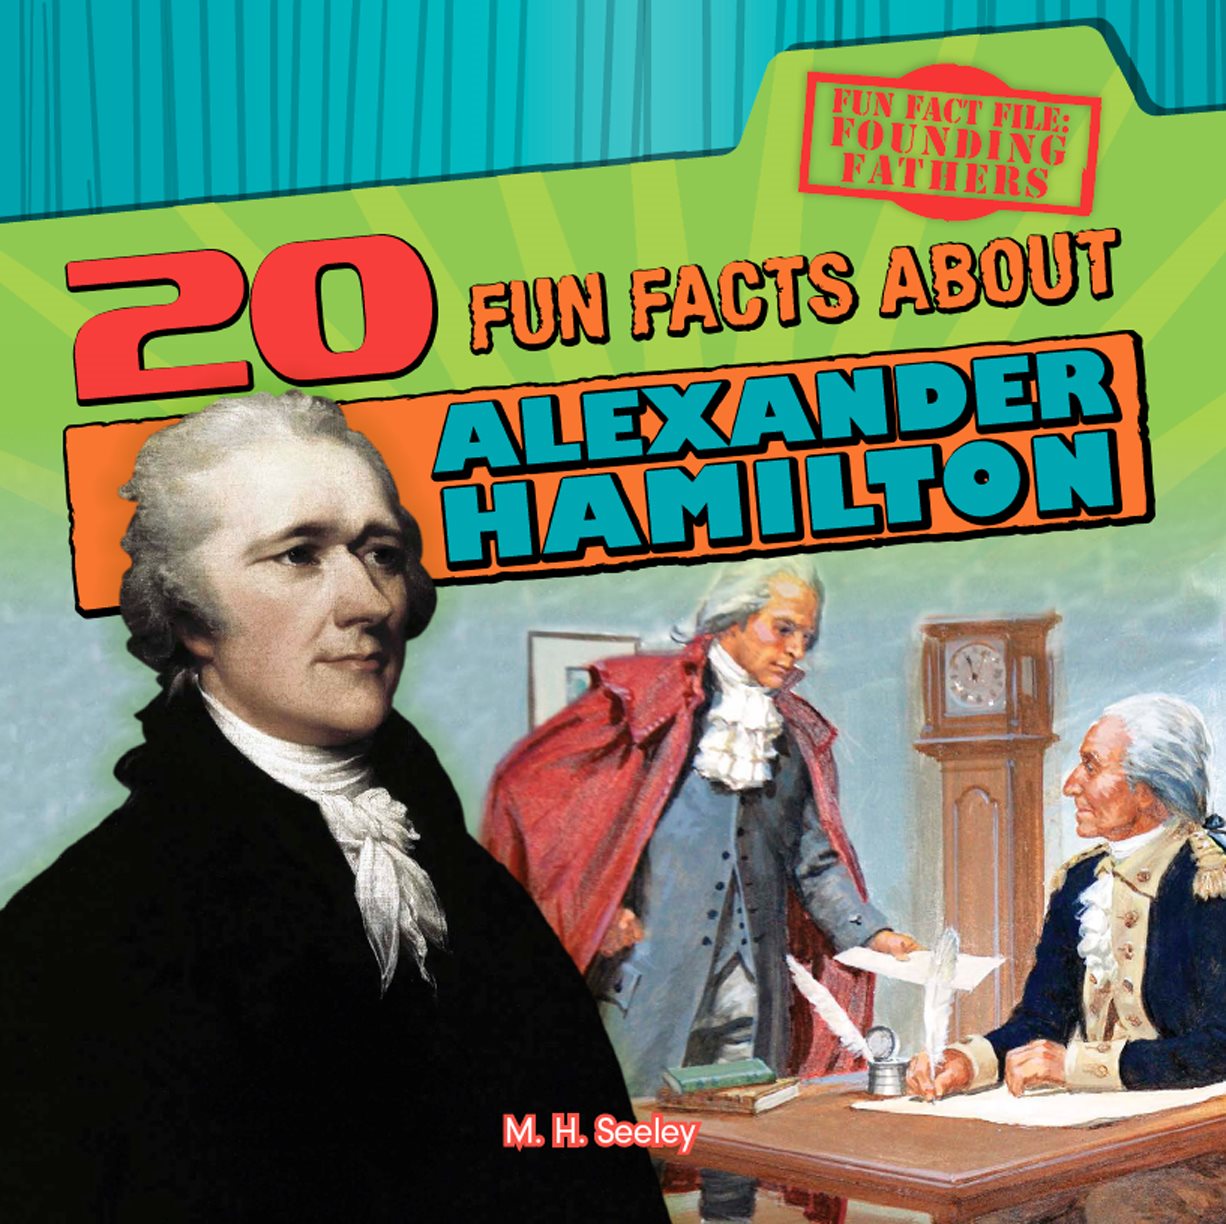 FO UN DI NG FA TH ER S ALEXANDER HAMILT ON FUN FA CTS ABOUT By M H - photo 1